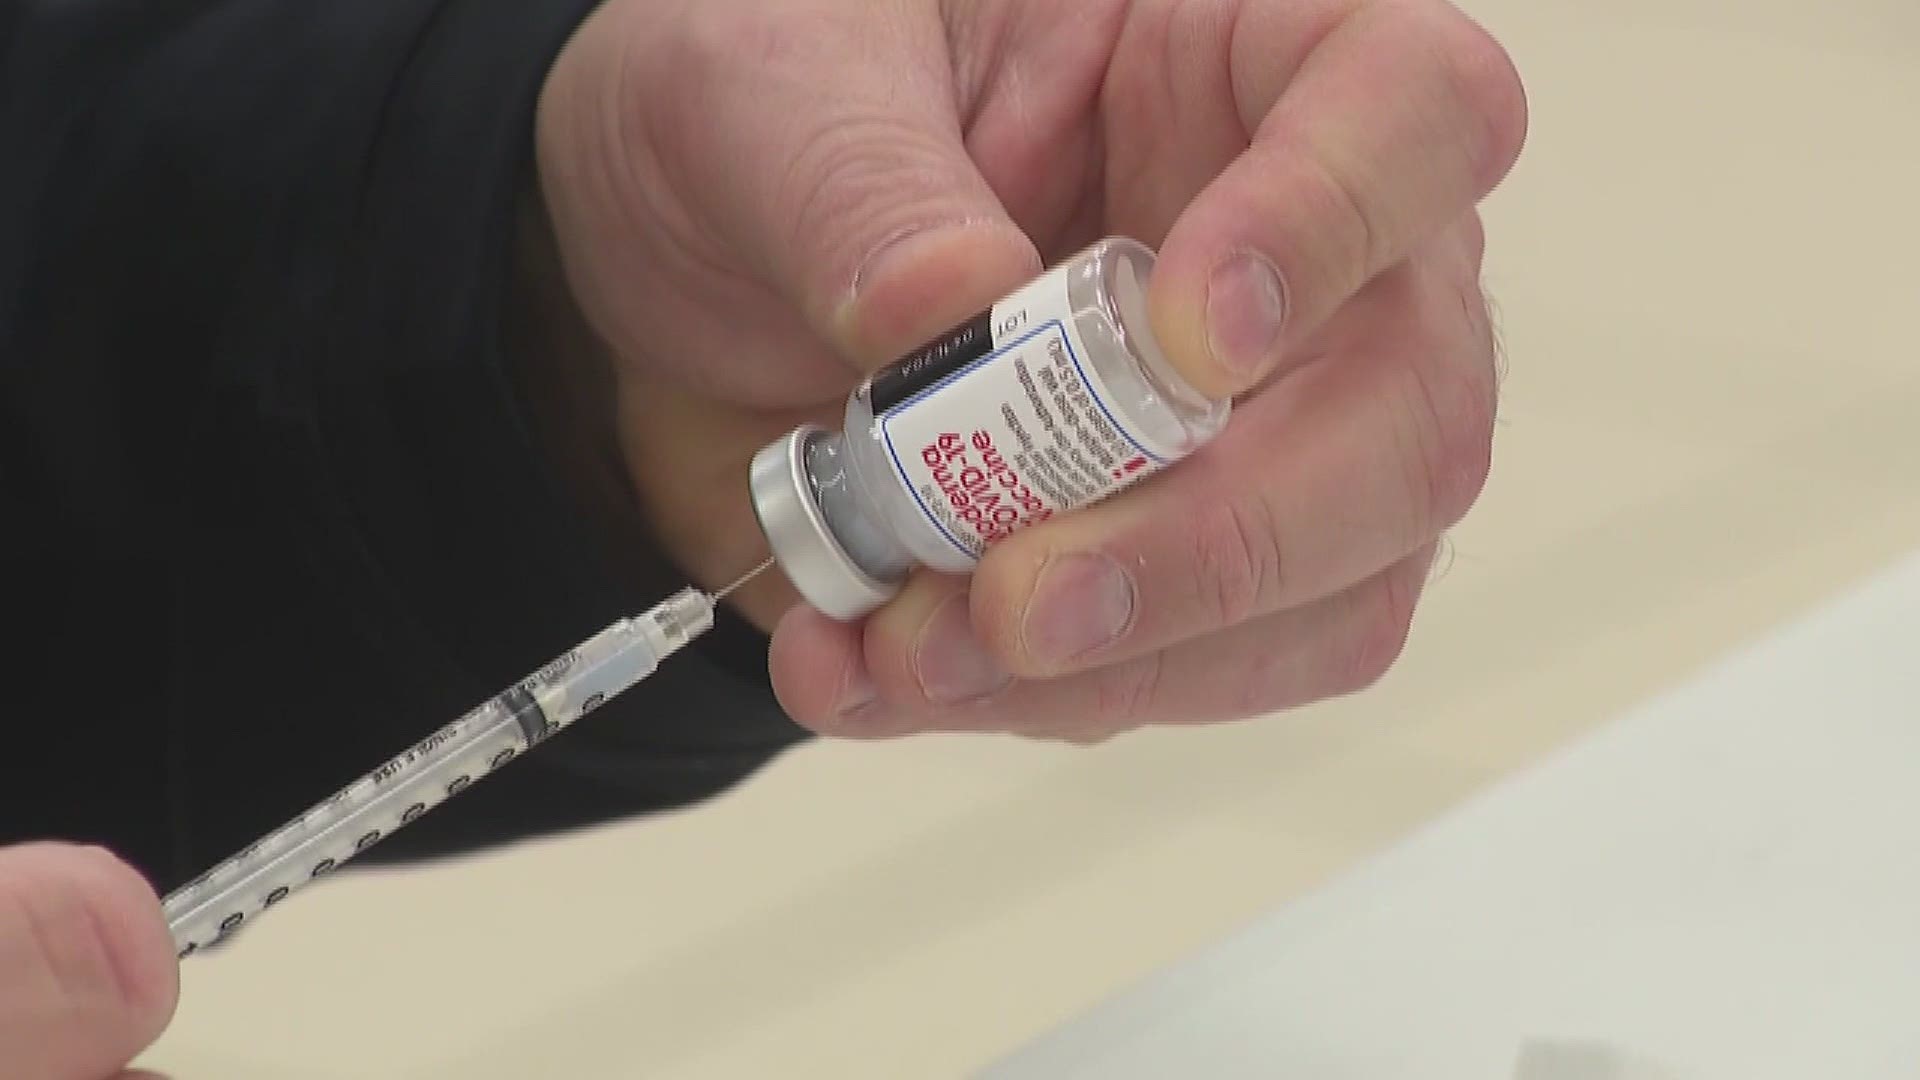 More than 1,100 people will get their first dose of the Pfizer vaccine on Wed., Mar. 3 as the health department awaits the new Johnson & Johnson vaccine's arrival.